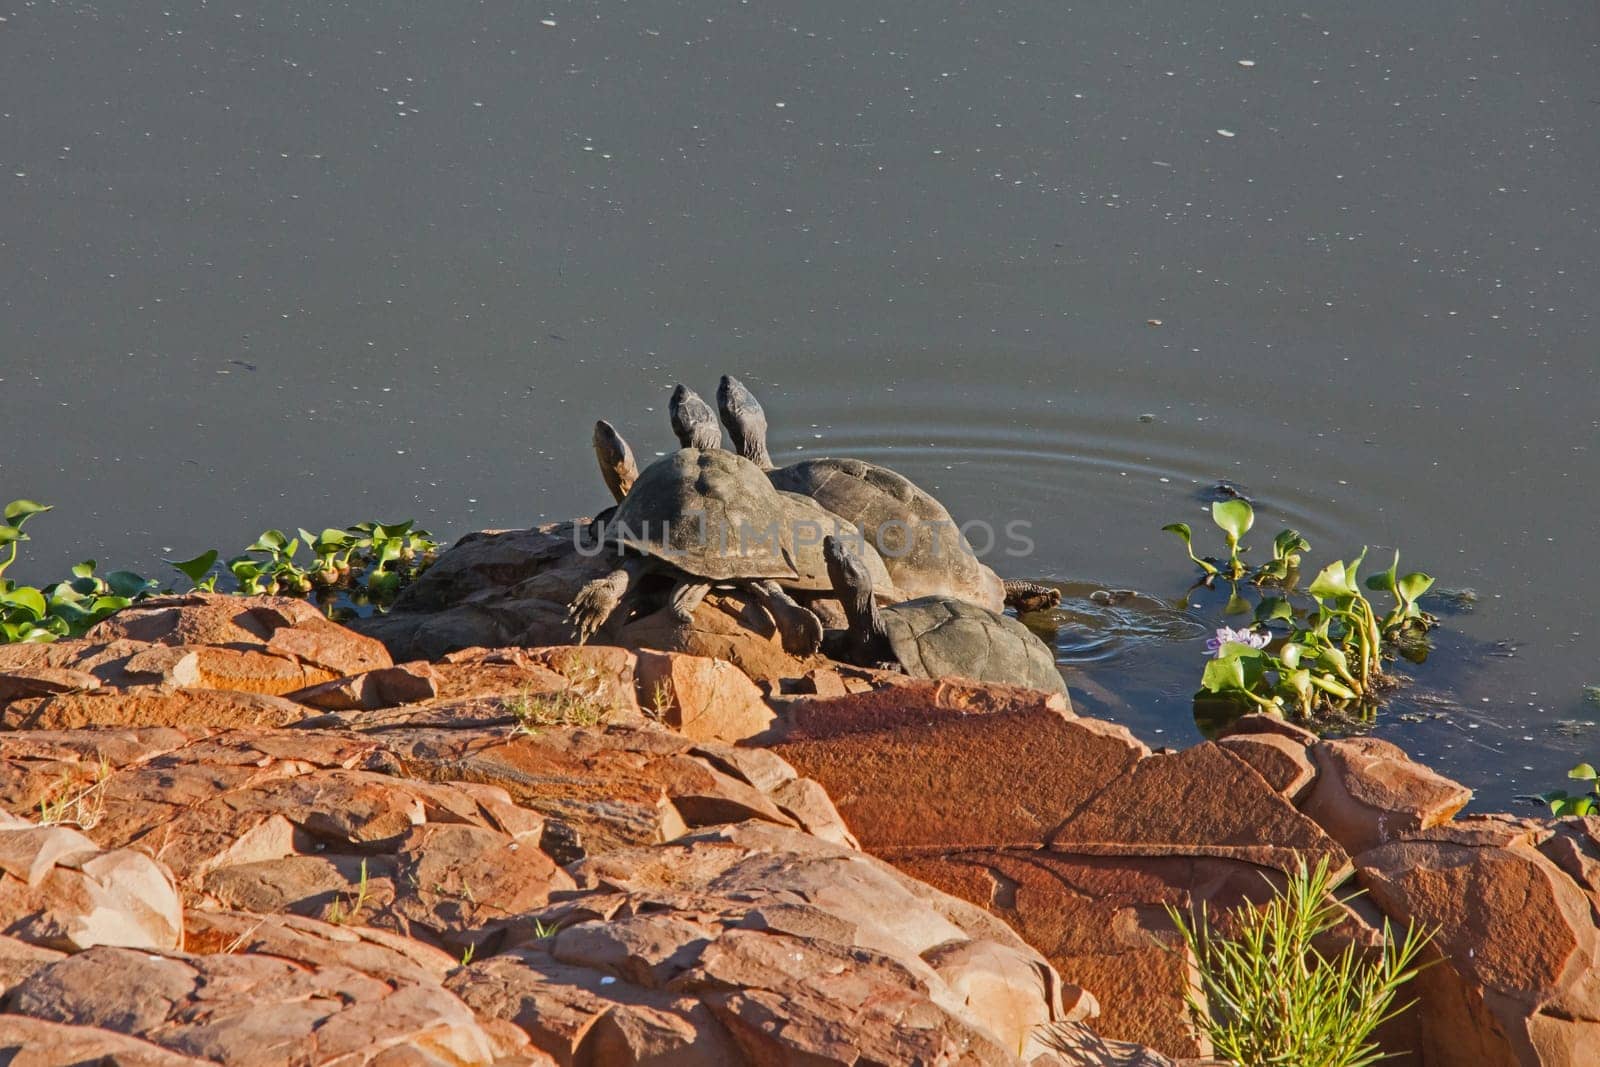 African Helmeted Turtles (Pelomedusa subrufa), also known as African  Marsh Terrapin sunbathing on the rocky bank of a river in Kruger National Park South Africa